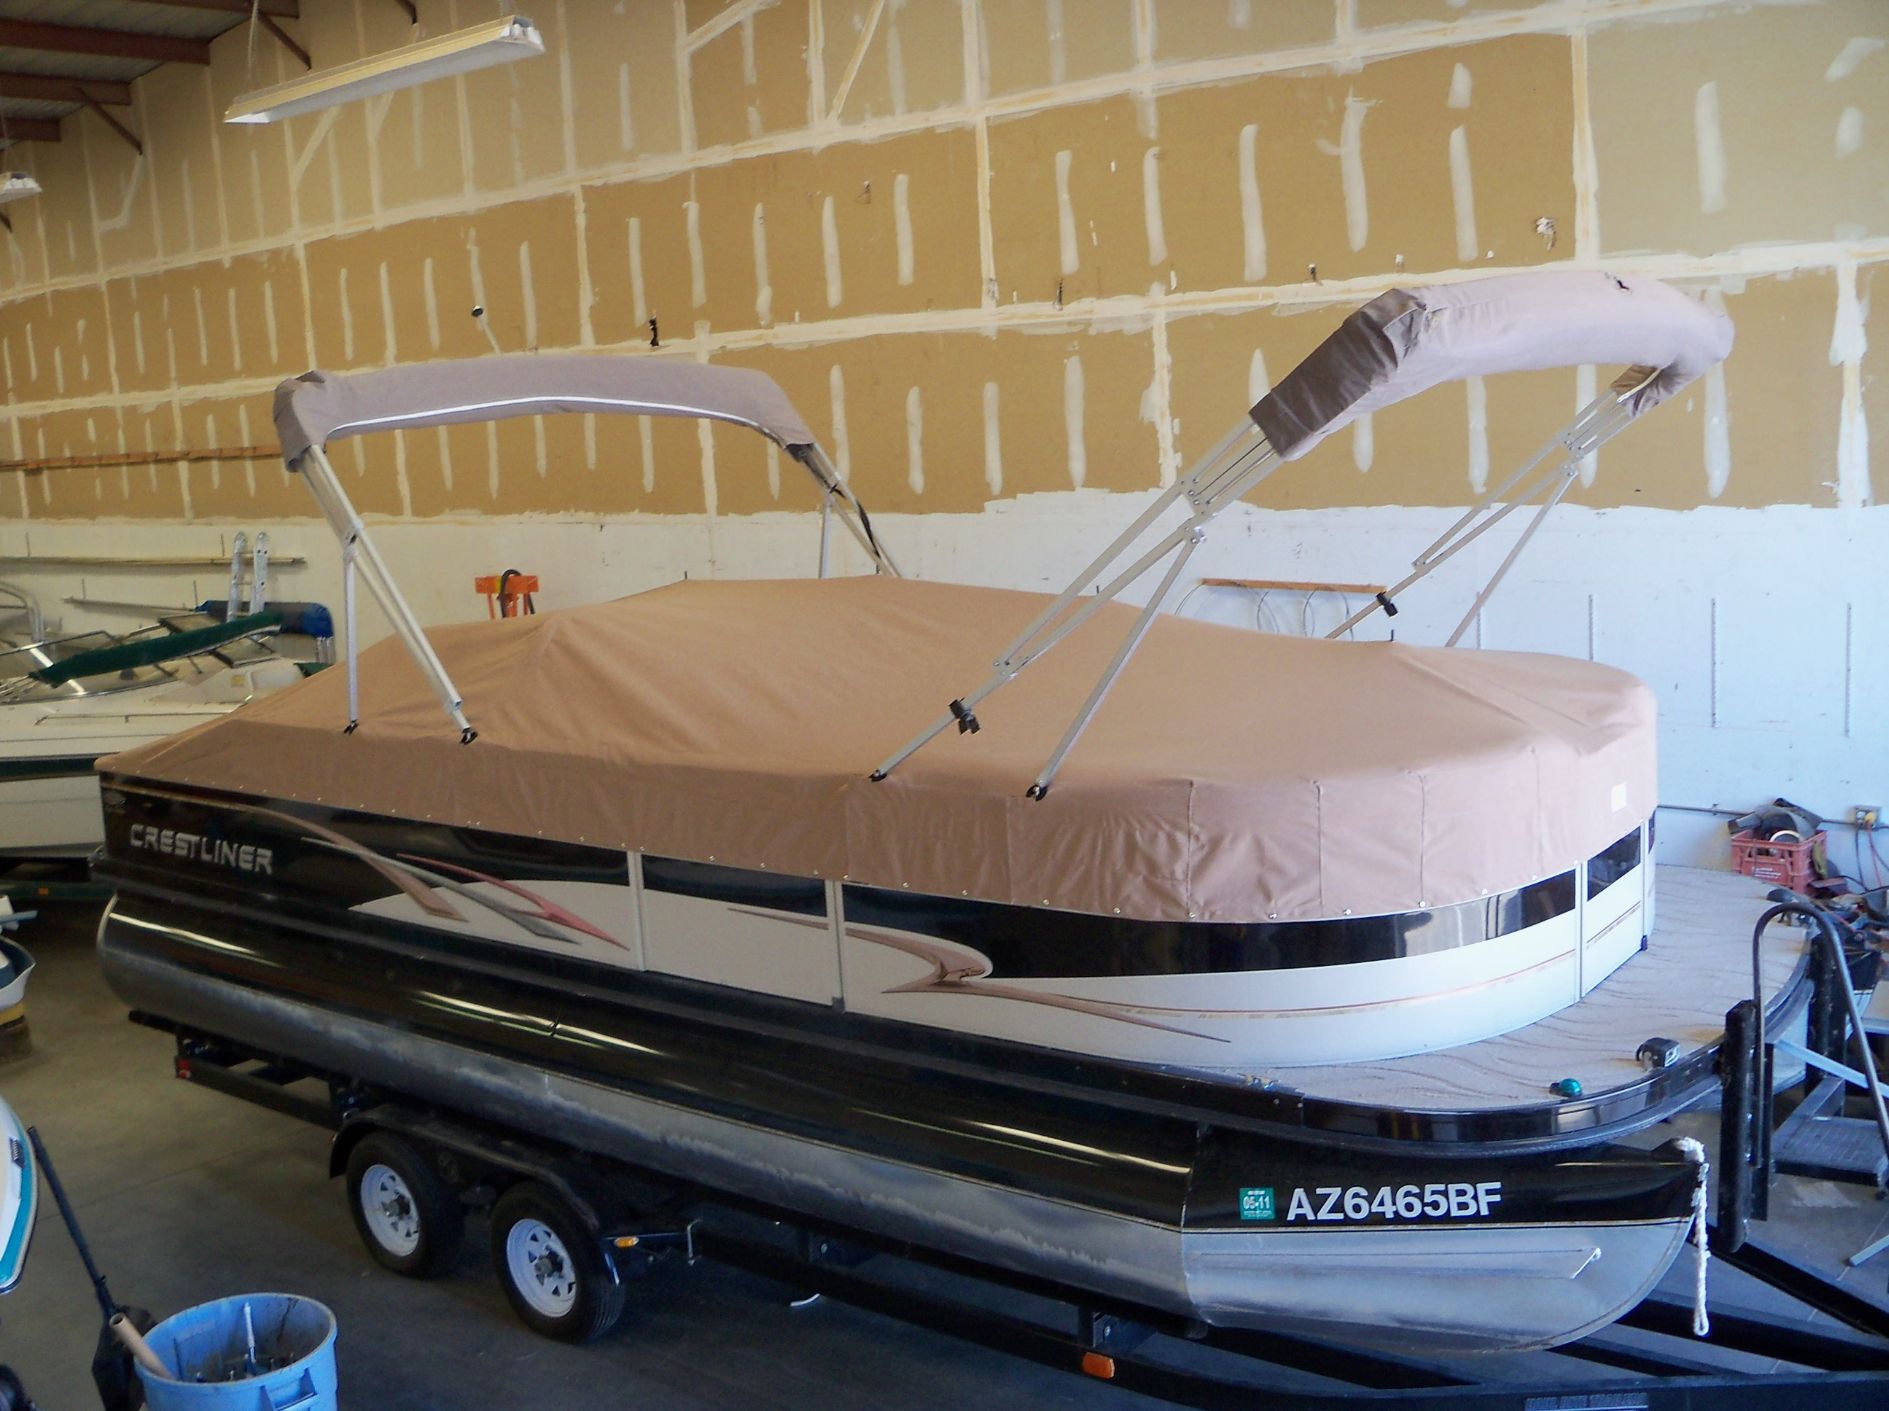 Click on the image below to view other Pontoon Boat Covers